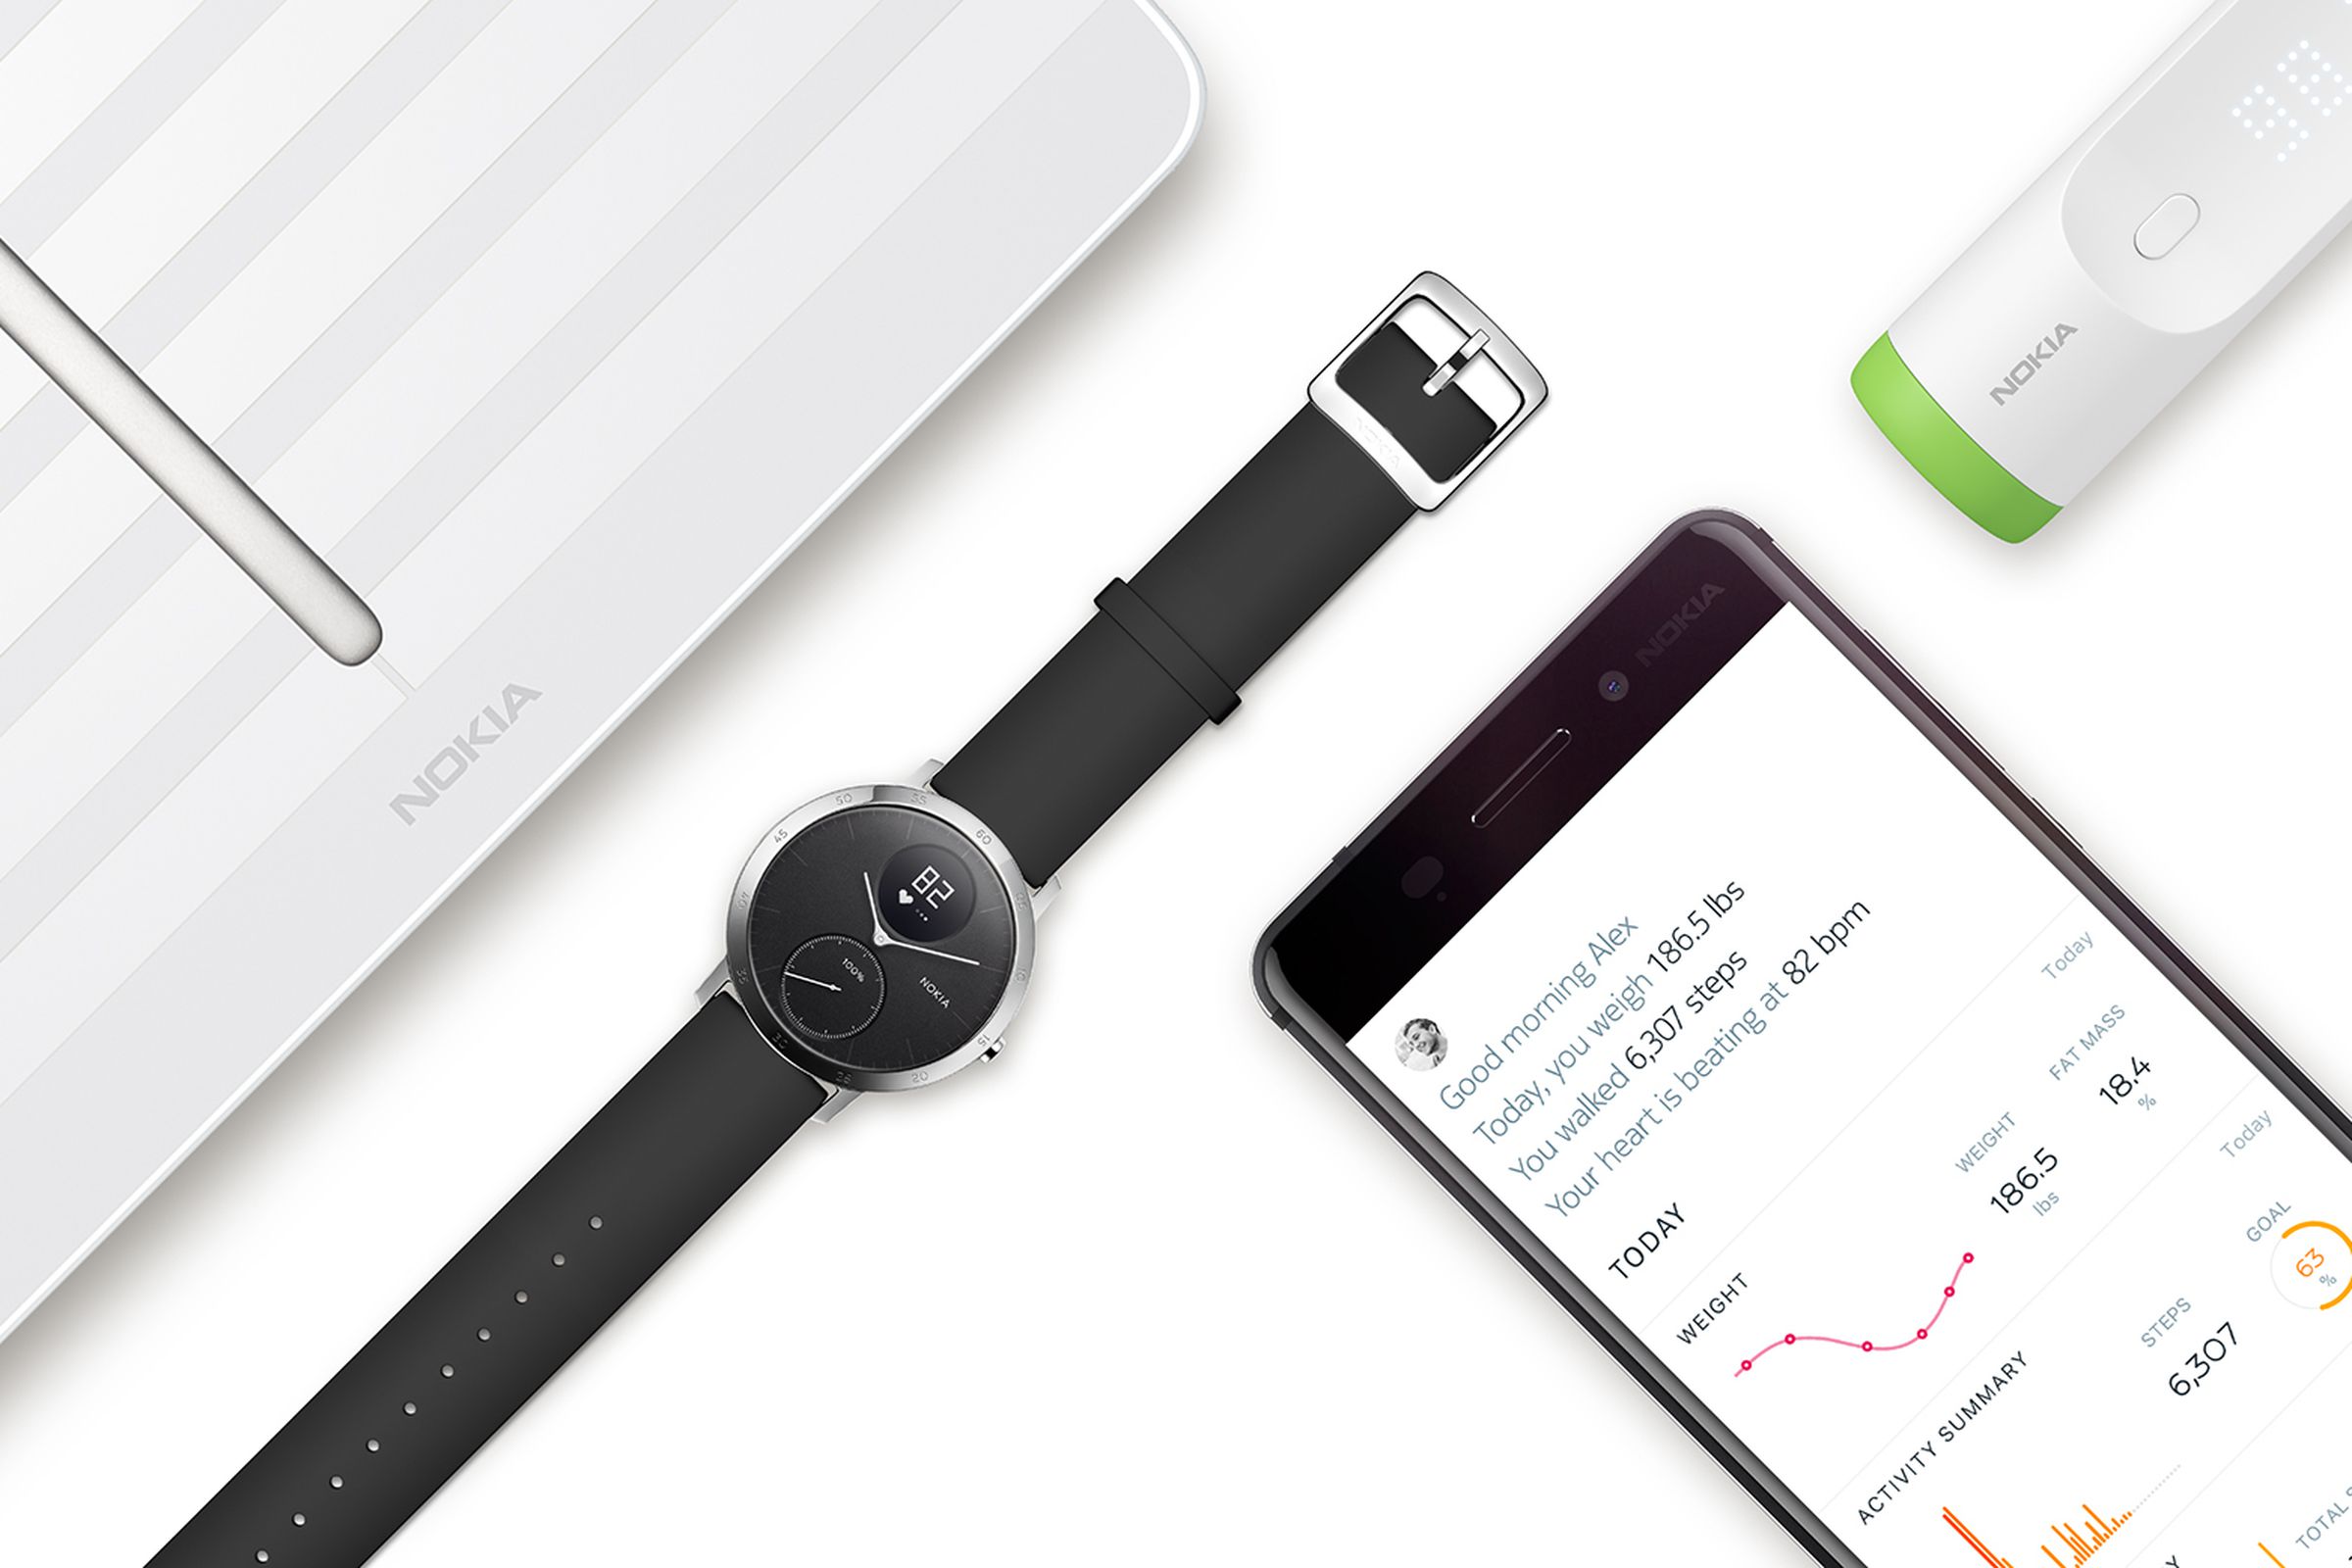 Nokia Withings products